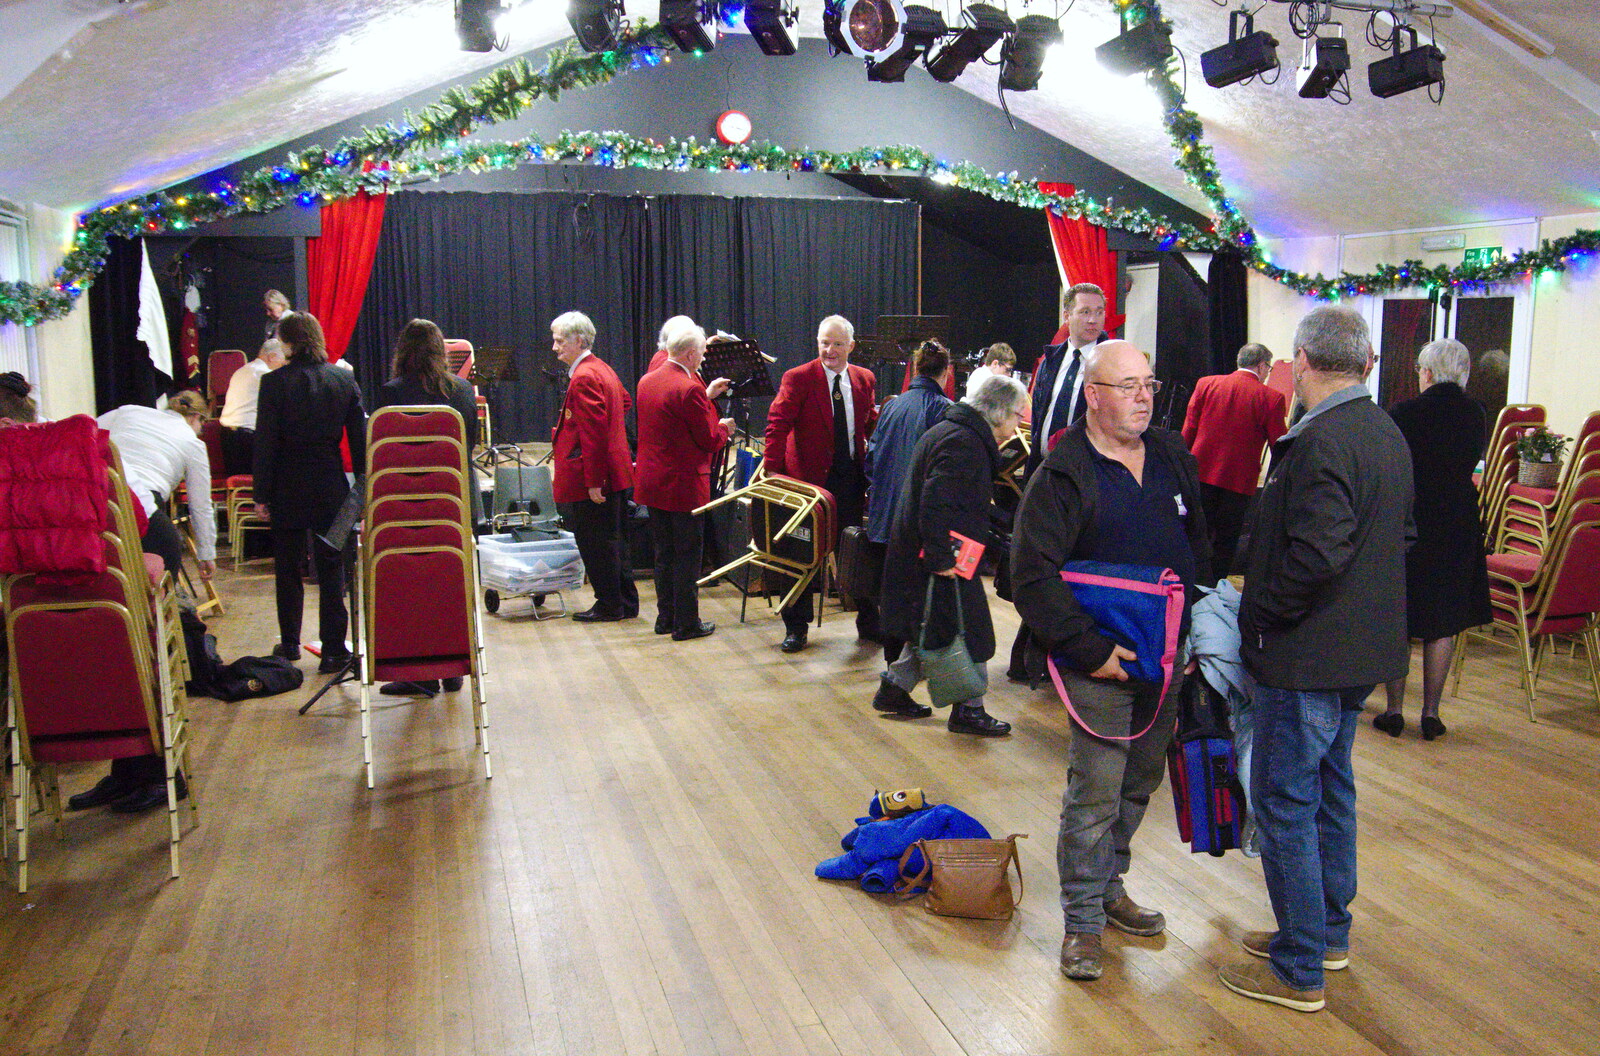 The band help put chairs away after the gig from GSB Concerts and the BSCC Christmas Dinner, Suffolk - 13th December 2019